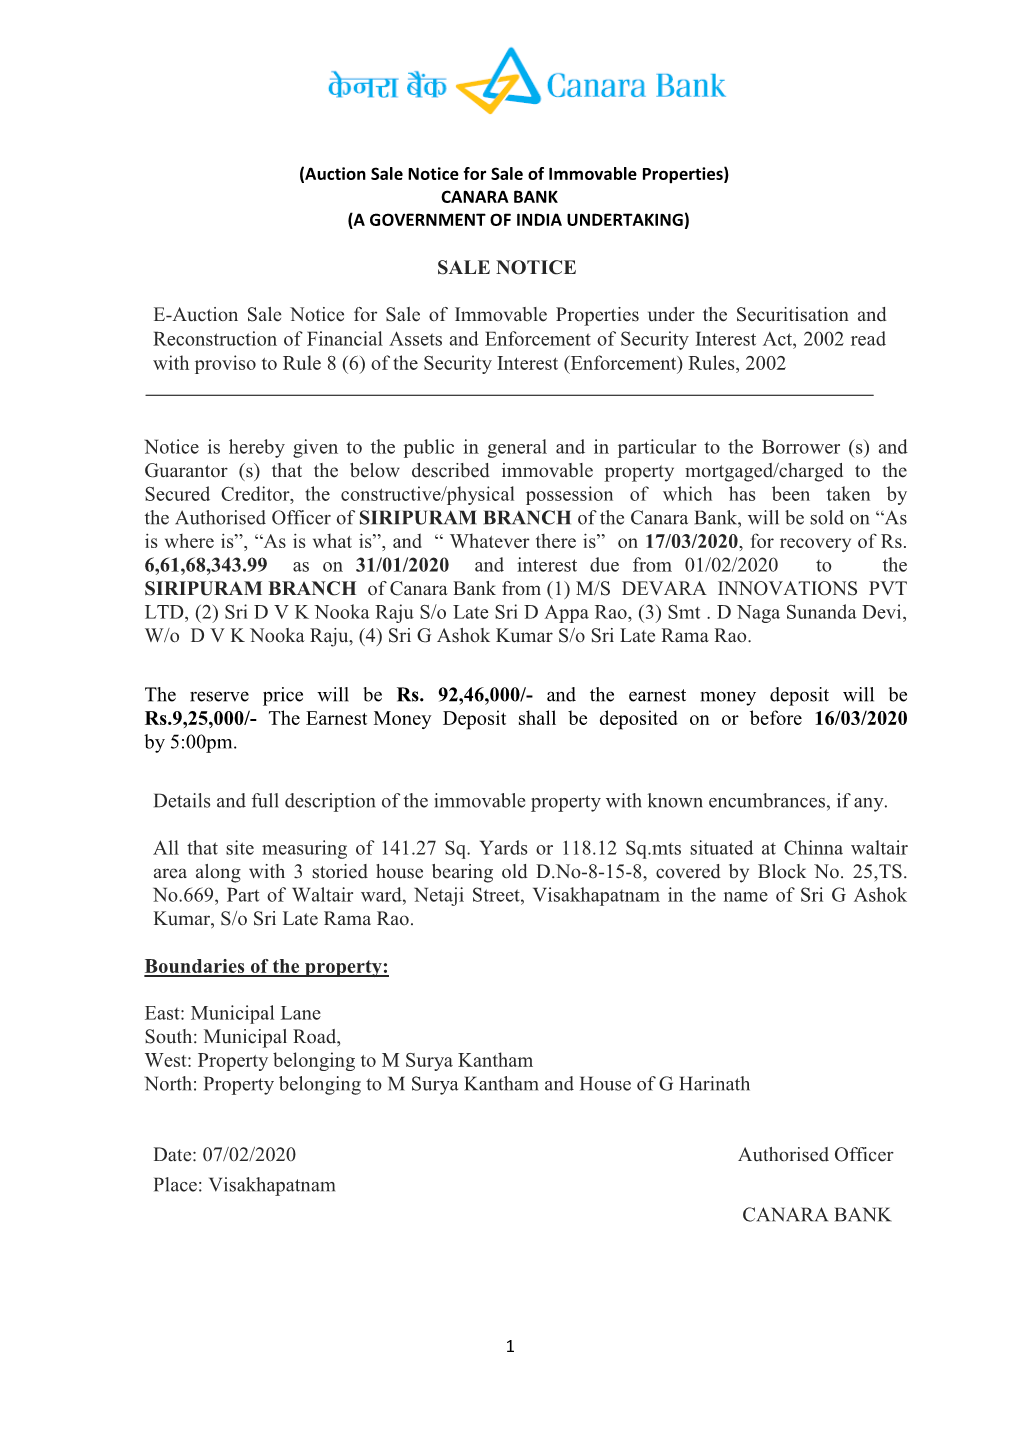 SALE NOTICE E-Auction Sale Notice for Sale of Immovable Properties